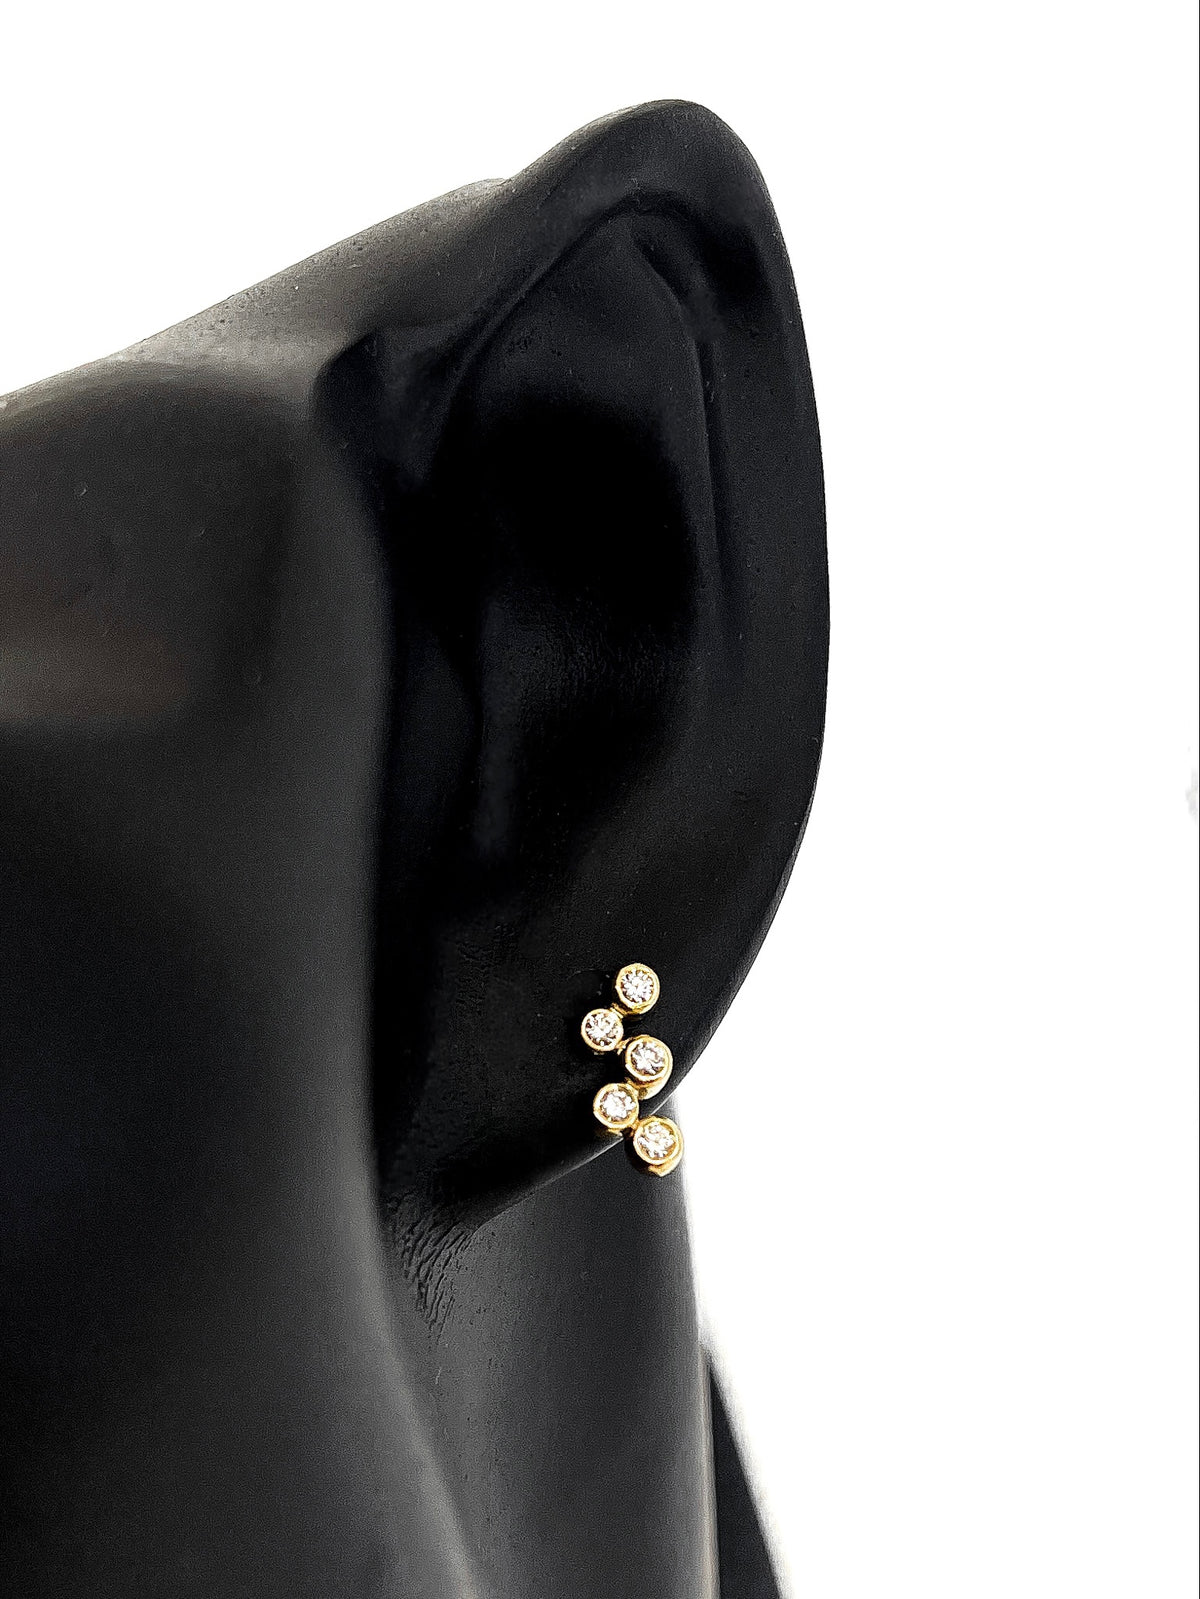 14K Yellow Gold 0.20cttw Diamond Cassiopeia Earrings with Butterfly Backs - 4mm x 10mm